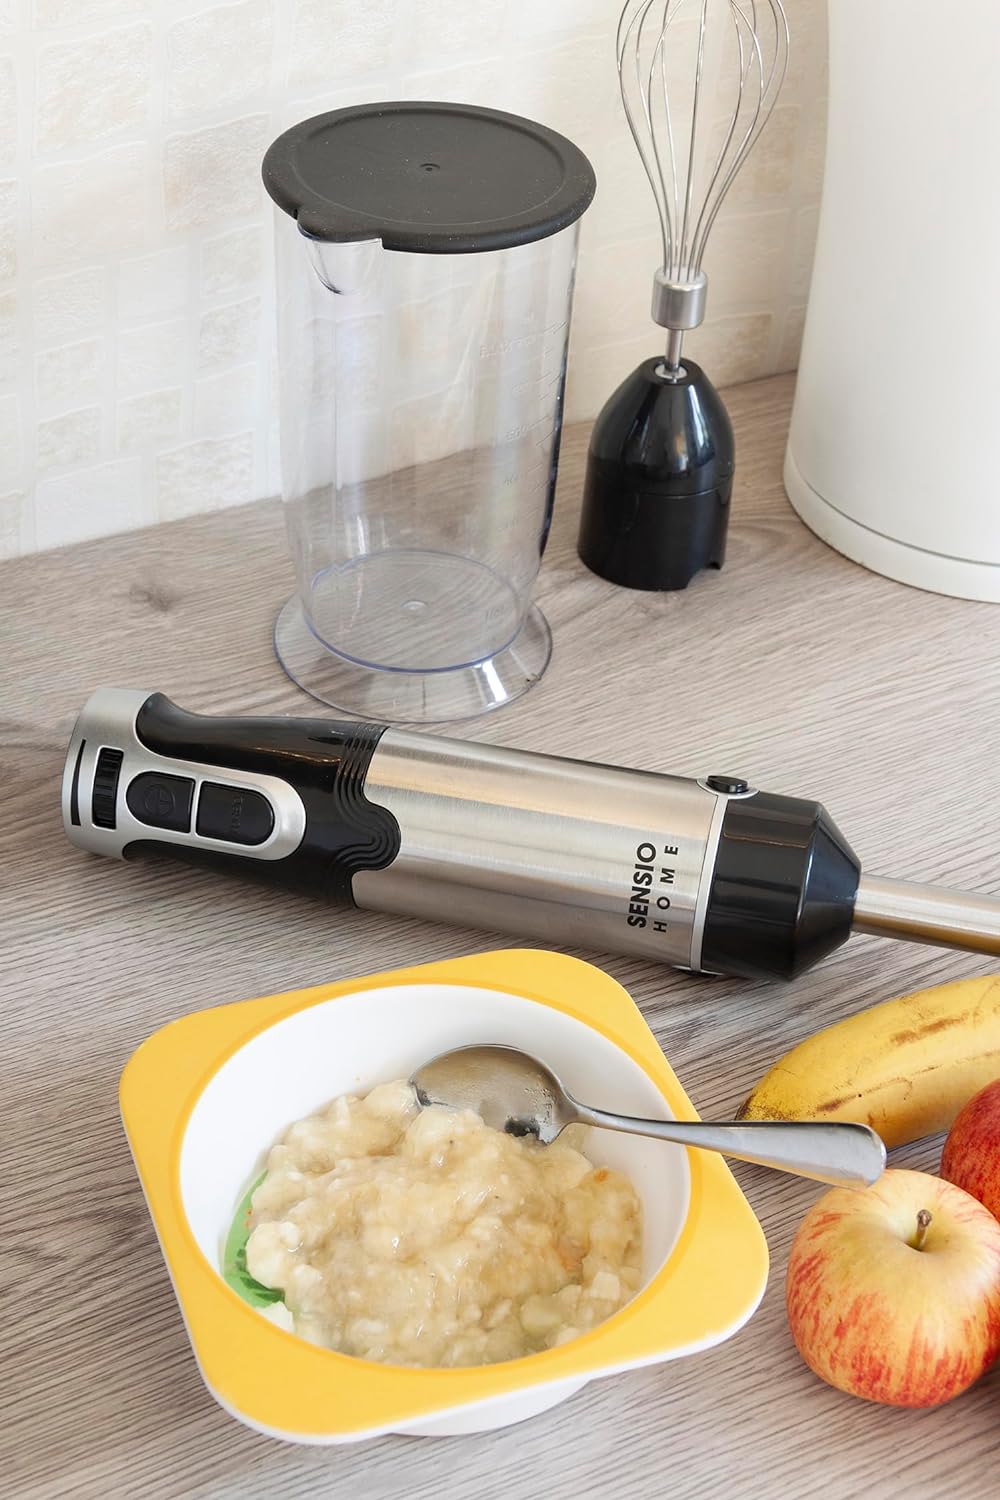 Sensio Home 1000W Super Powerful Hand Blender 3 - in - 1 Stainless Steel Stick Immersion Blender with Attachment, 700ml Mixing Beaker, Stainless Steel Whisk, Variable Speeds for Baby Food,Vegetables,Soup - Amazing Gadgets Outlet